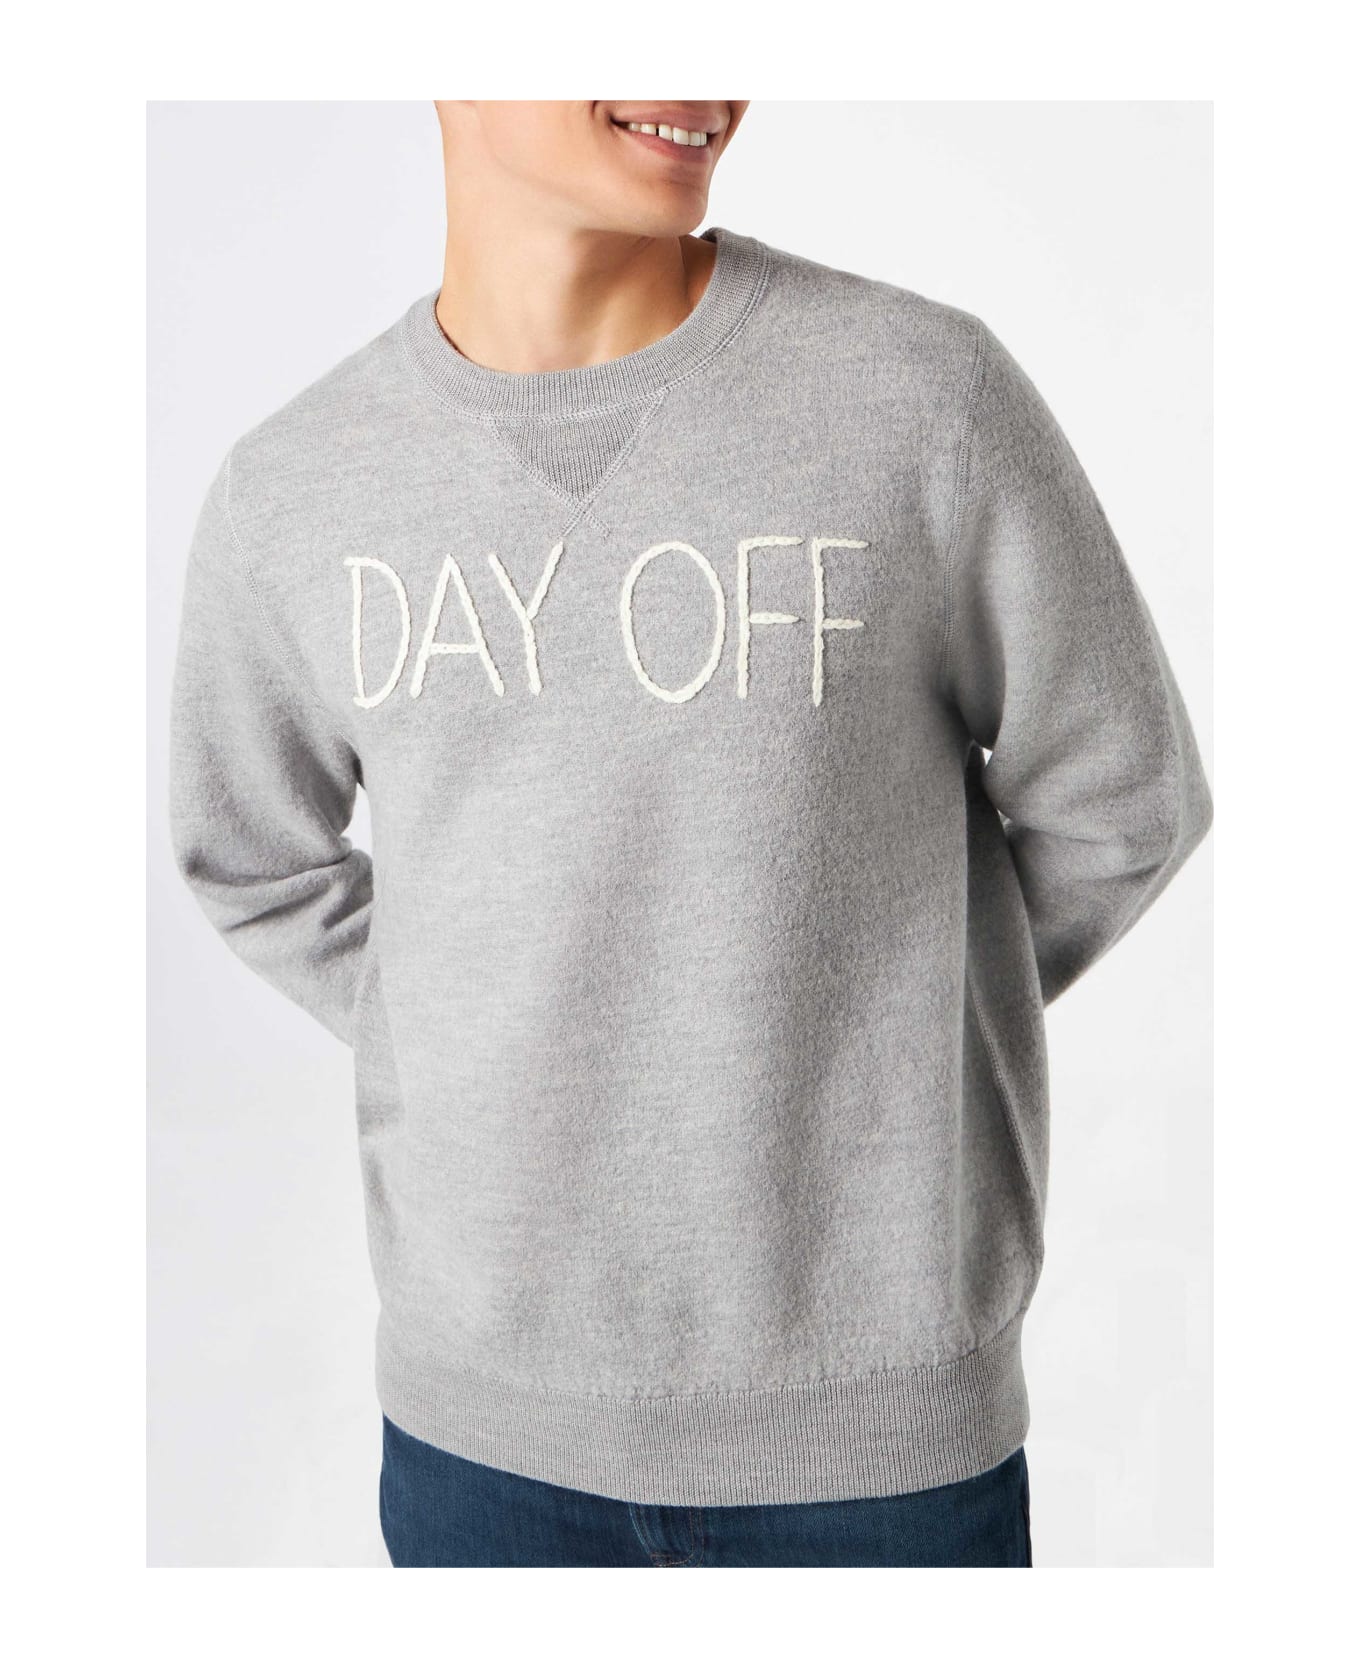 MC2 Saint Barth Man Crewneck Knitted Sweater With Day Off Embroidery - GREY